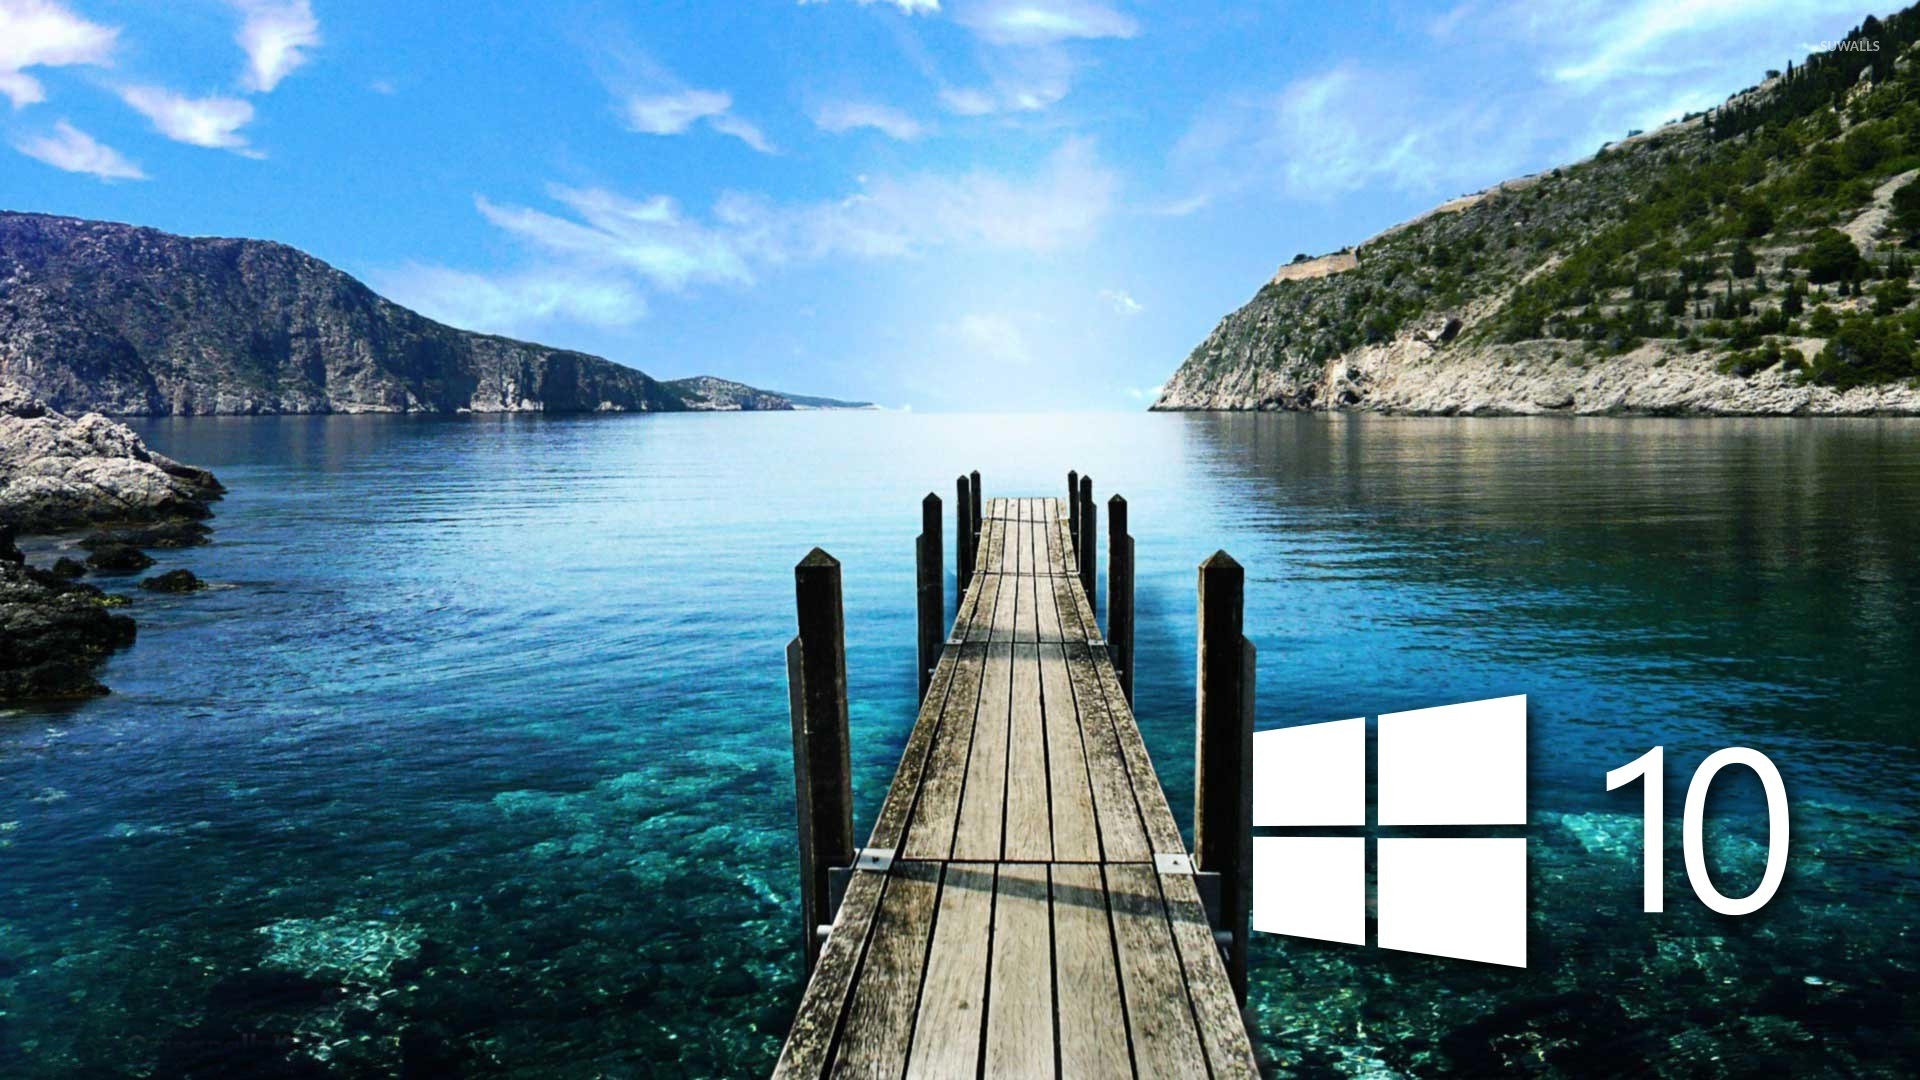 Windows 10 on the pier simple logo wallpaper - Computer wallpapers - #46919